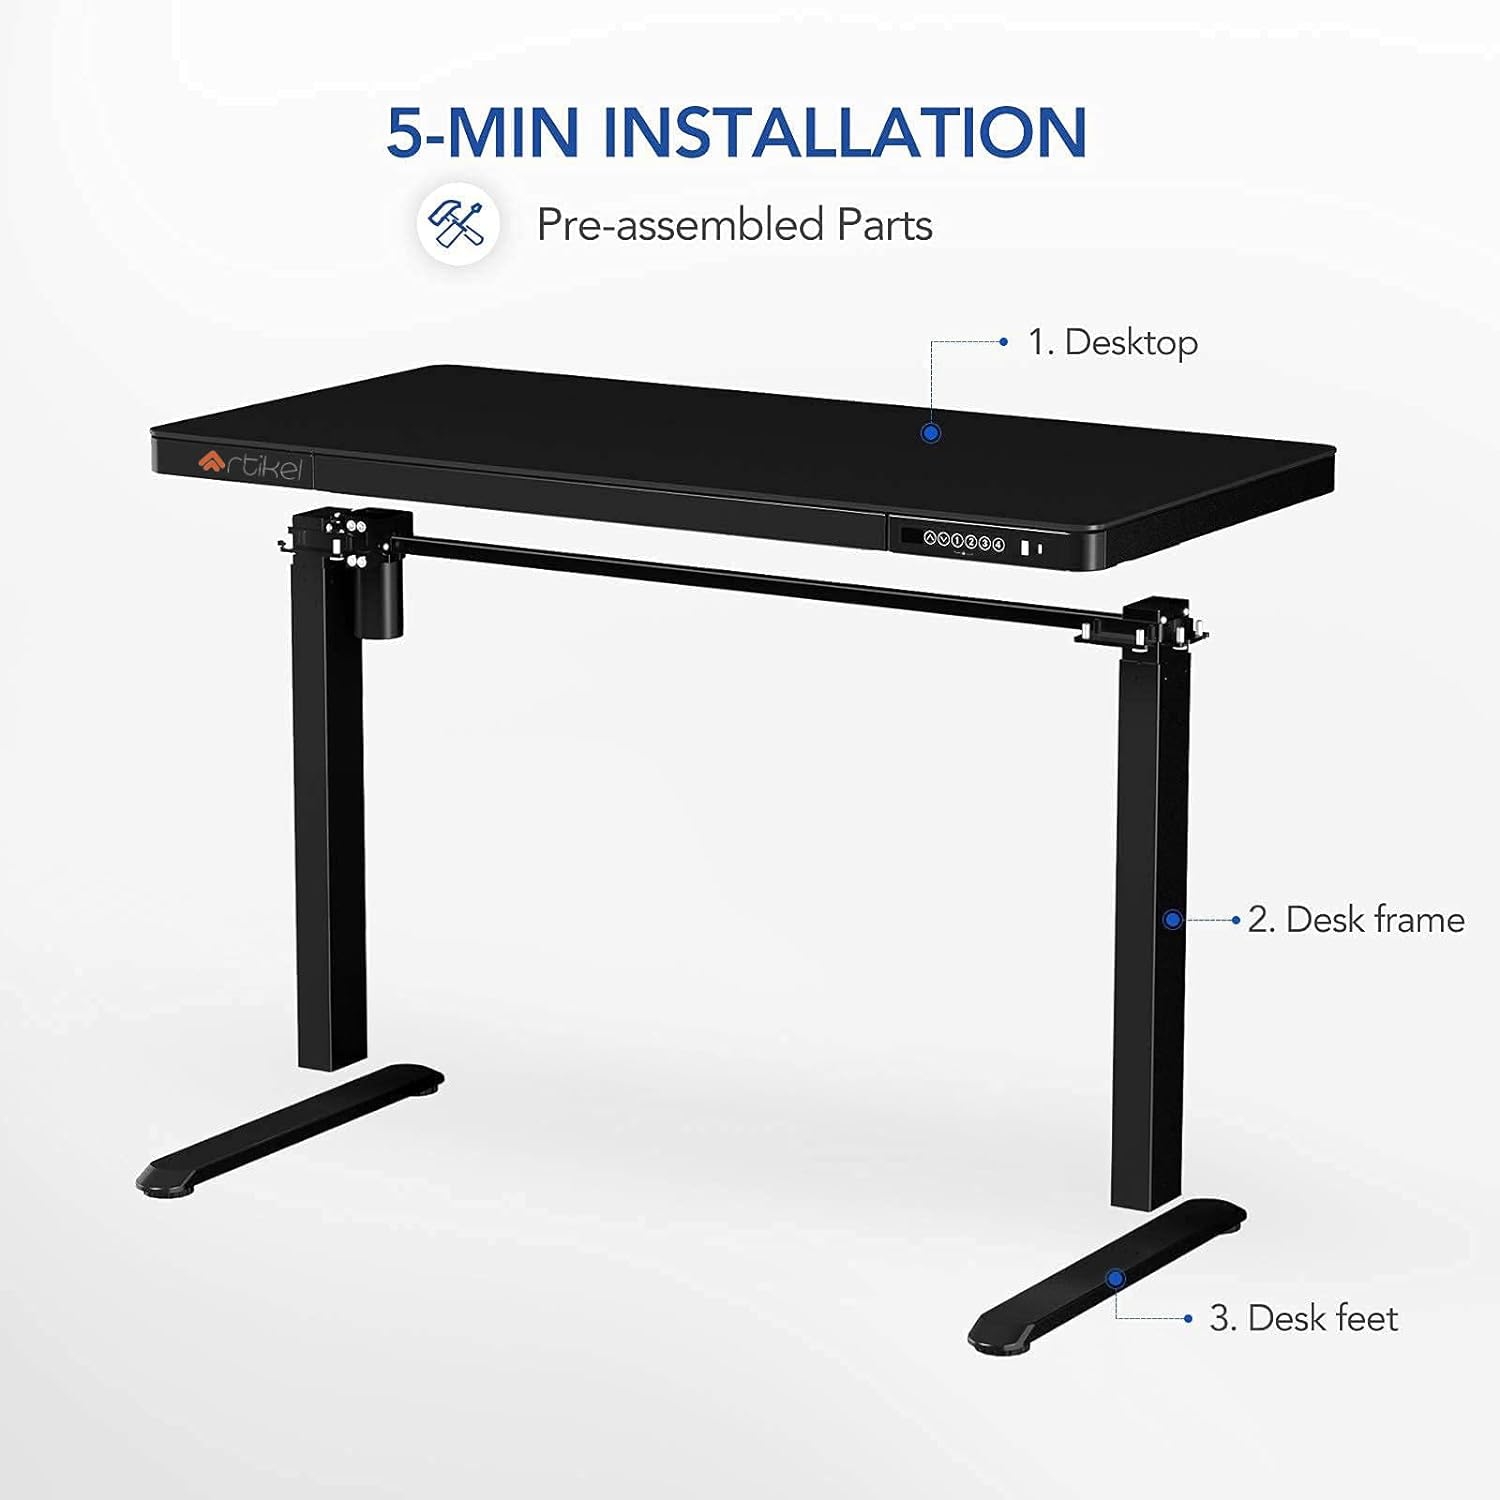 Drogo Artikel Advanced Pro Electric Height Adjustable Table DIY with 3 Year Warranty | Sit Stand Computer Desk 120 X 60 Cm - Black